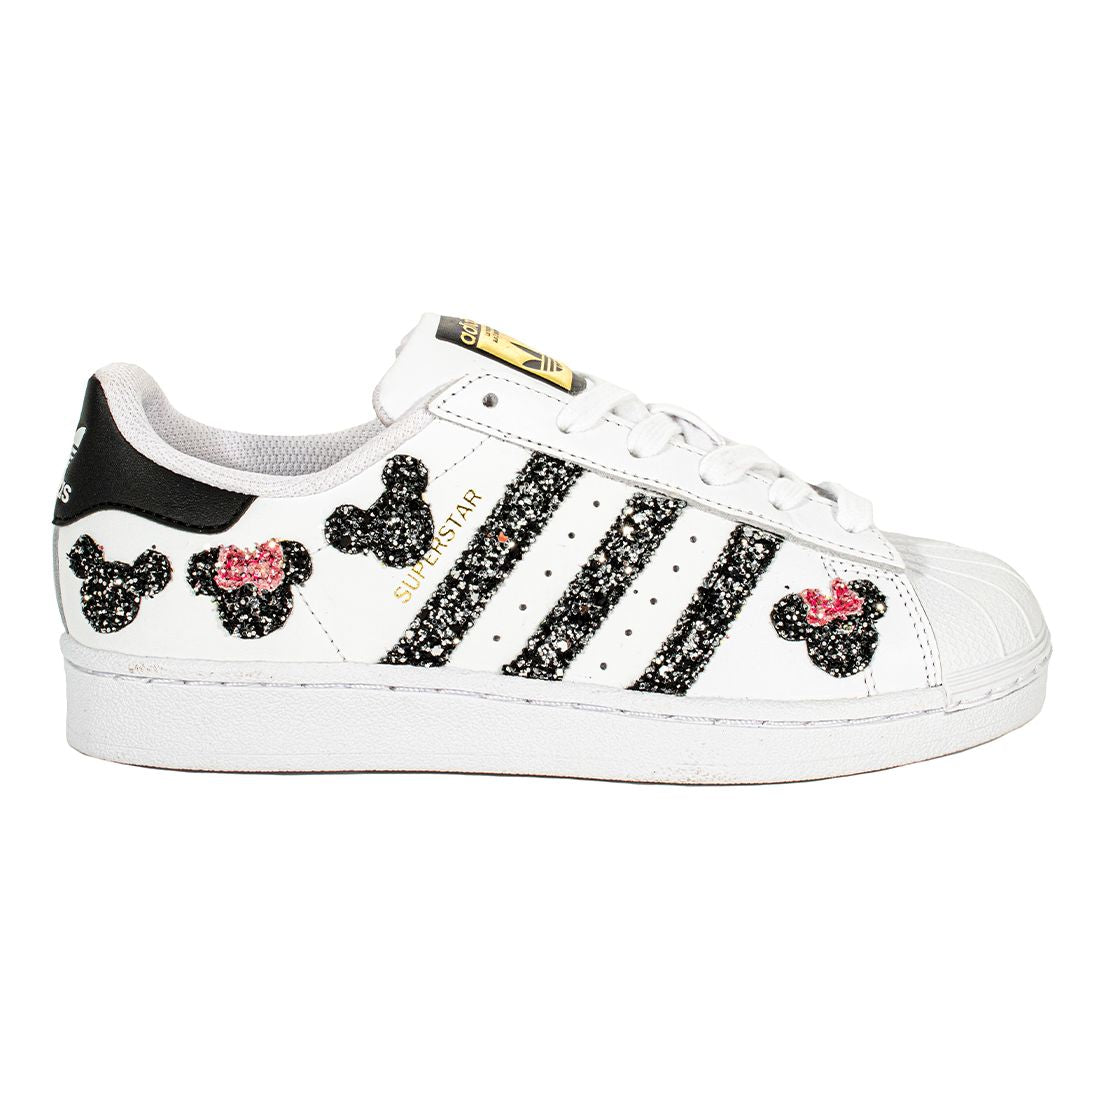 ADIDAS SUPERSTAR PERSONALIZZATE MICKY+MINNY